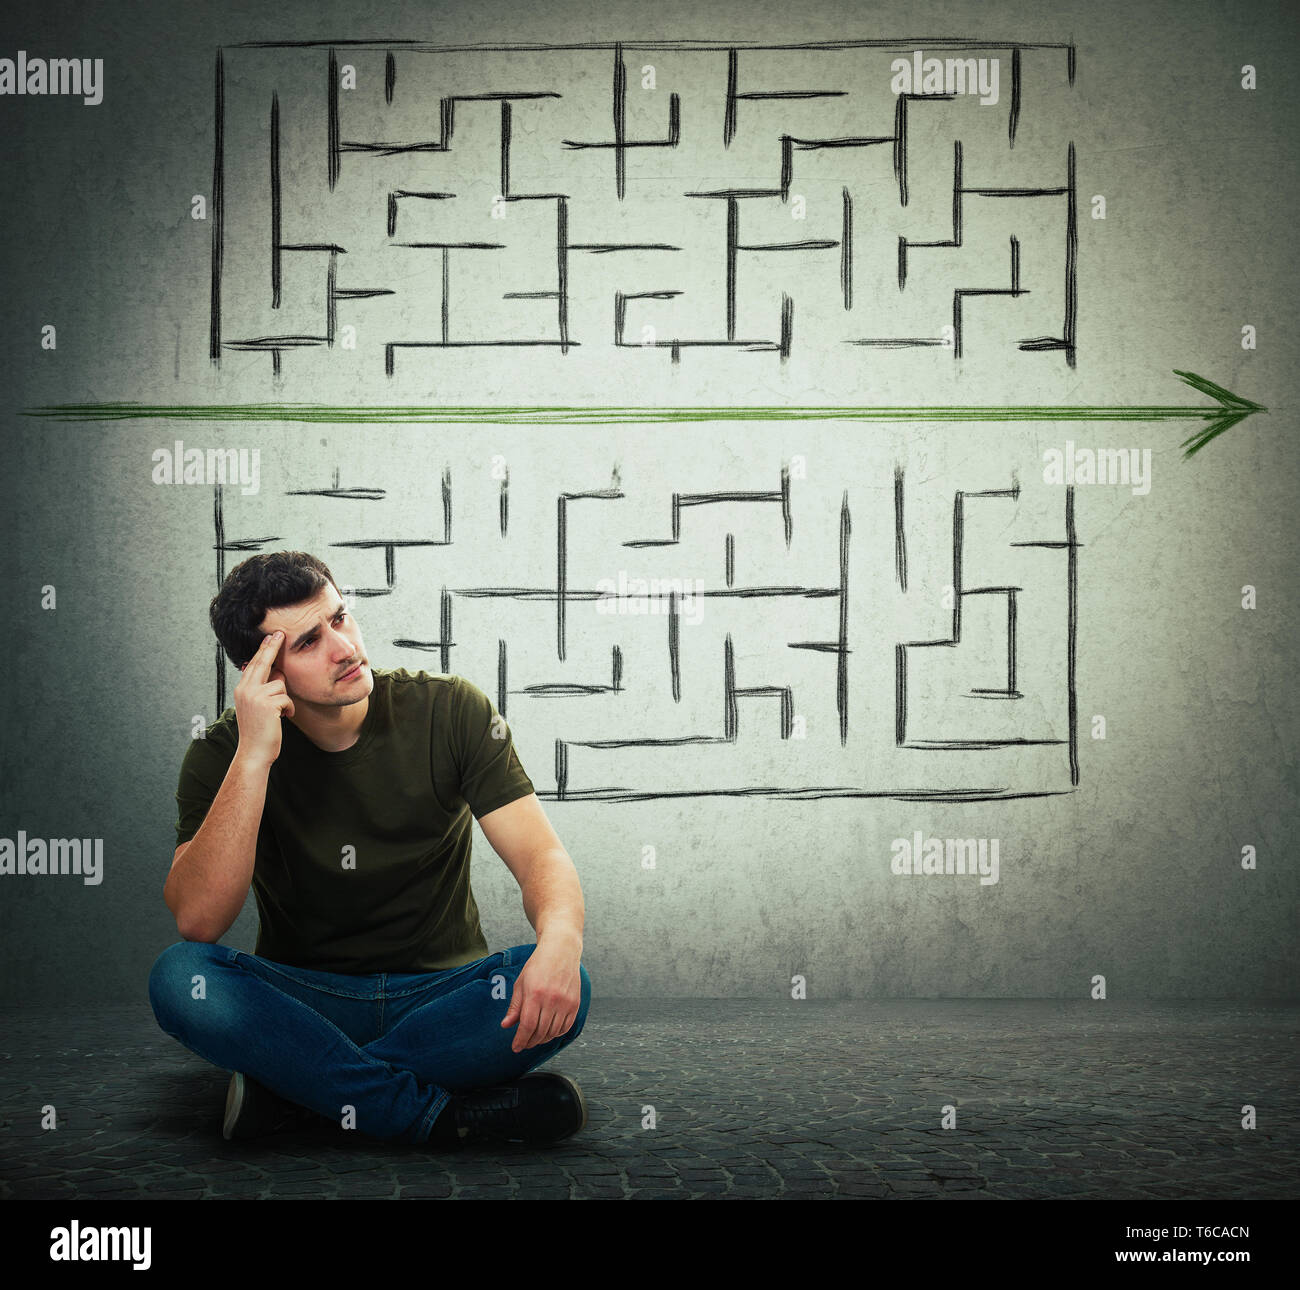 Man sitting on the floor hard thinking, find a solution to solve problem and escape from labyrinth. Breaking the rules, as a green arrow pierce the ma Stock Photo